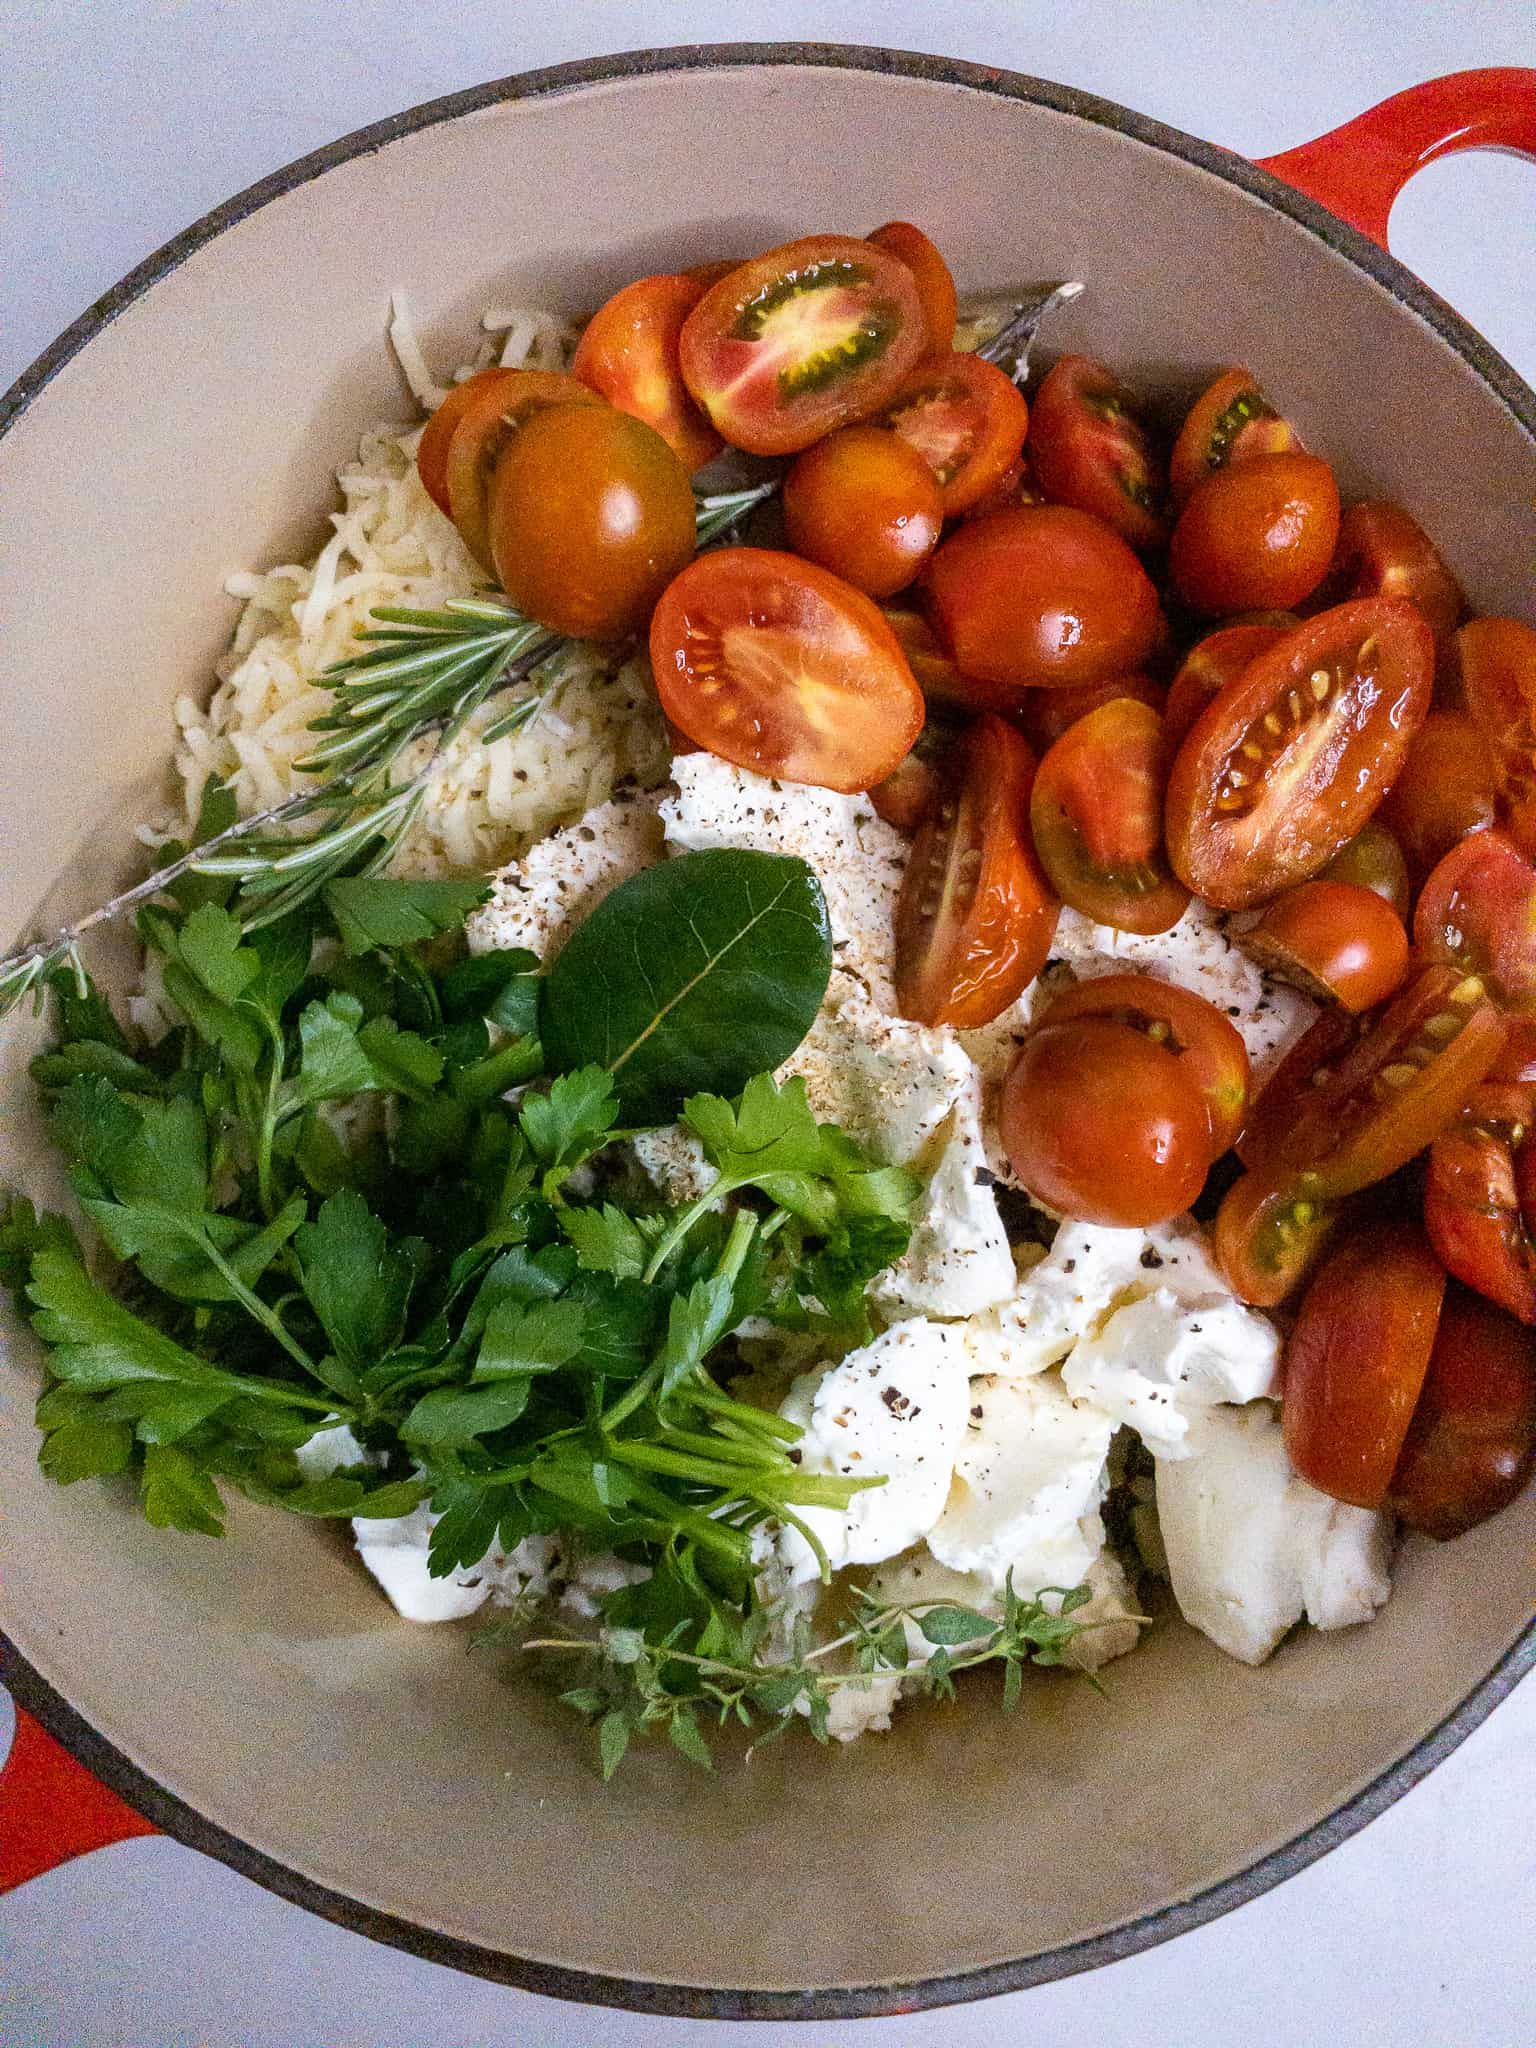 Tomatoes, herbs, cheeses, and pasta layered in a pot